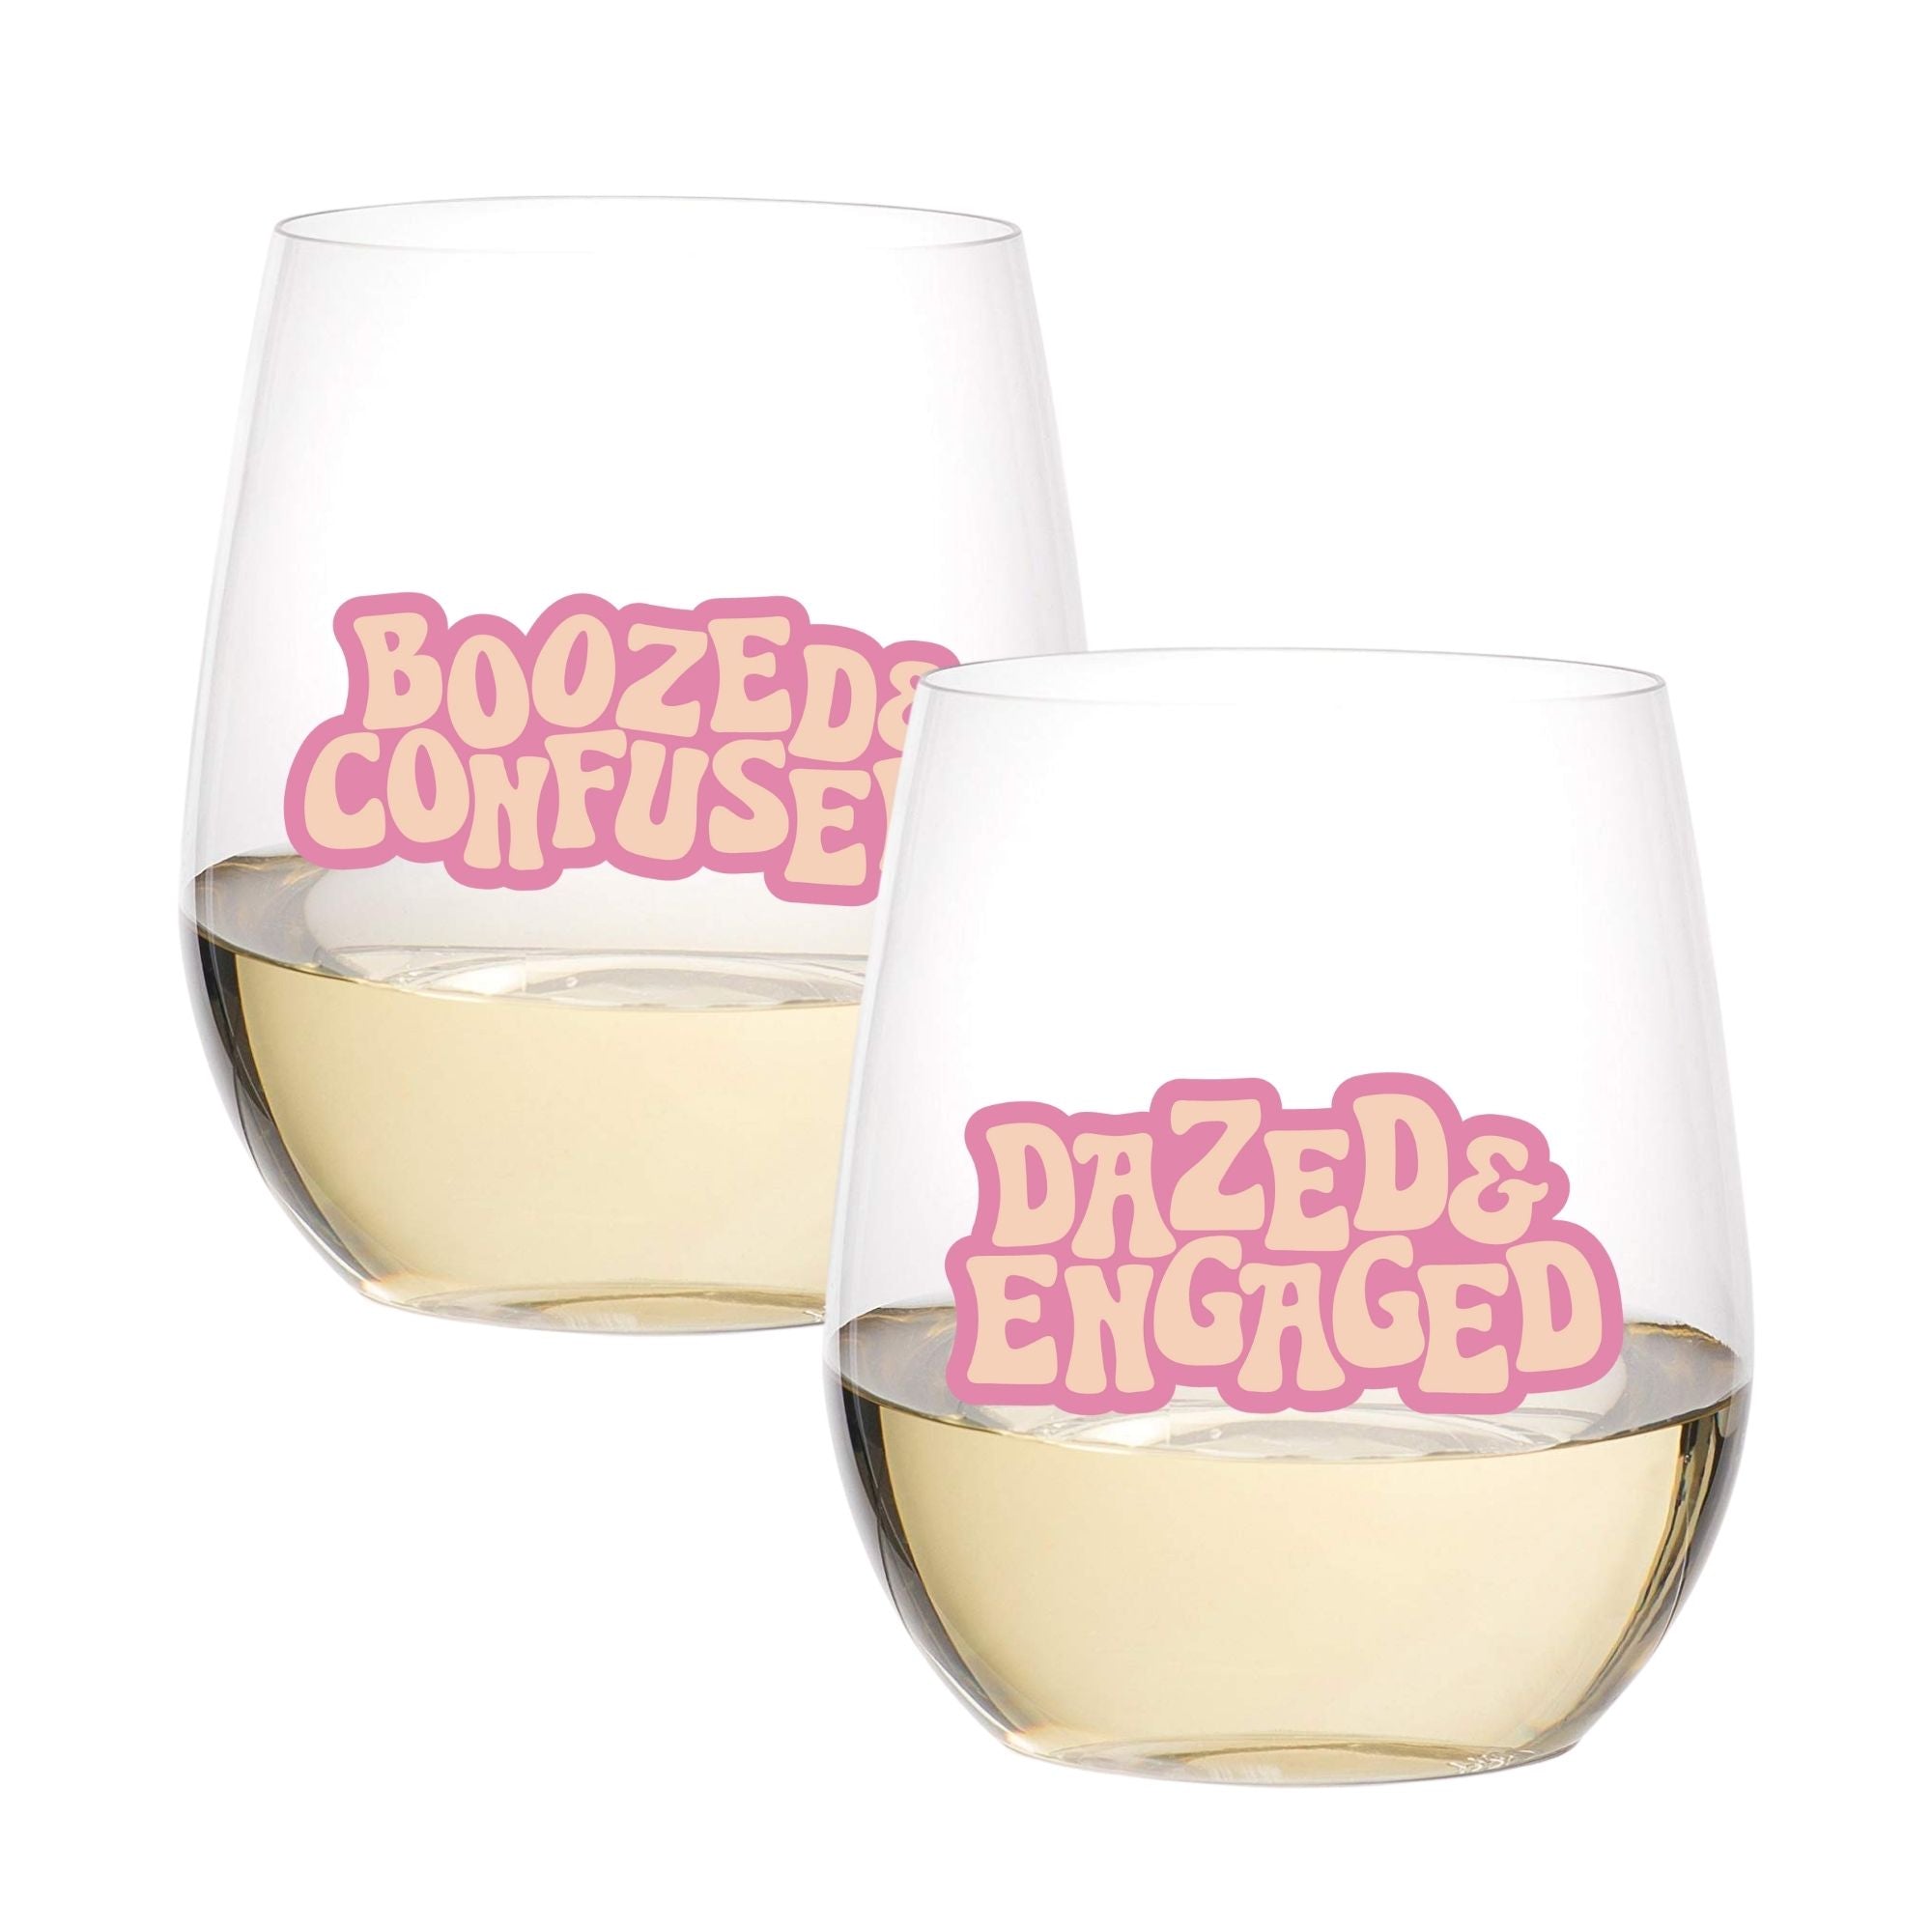 Dazed and Engaged / Boozed and Engaged Stemless Wine Tumbler - Sprinkled With Pink #bachelorette #custom #gifts